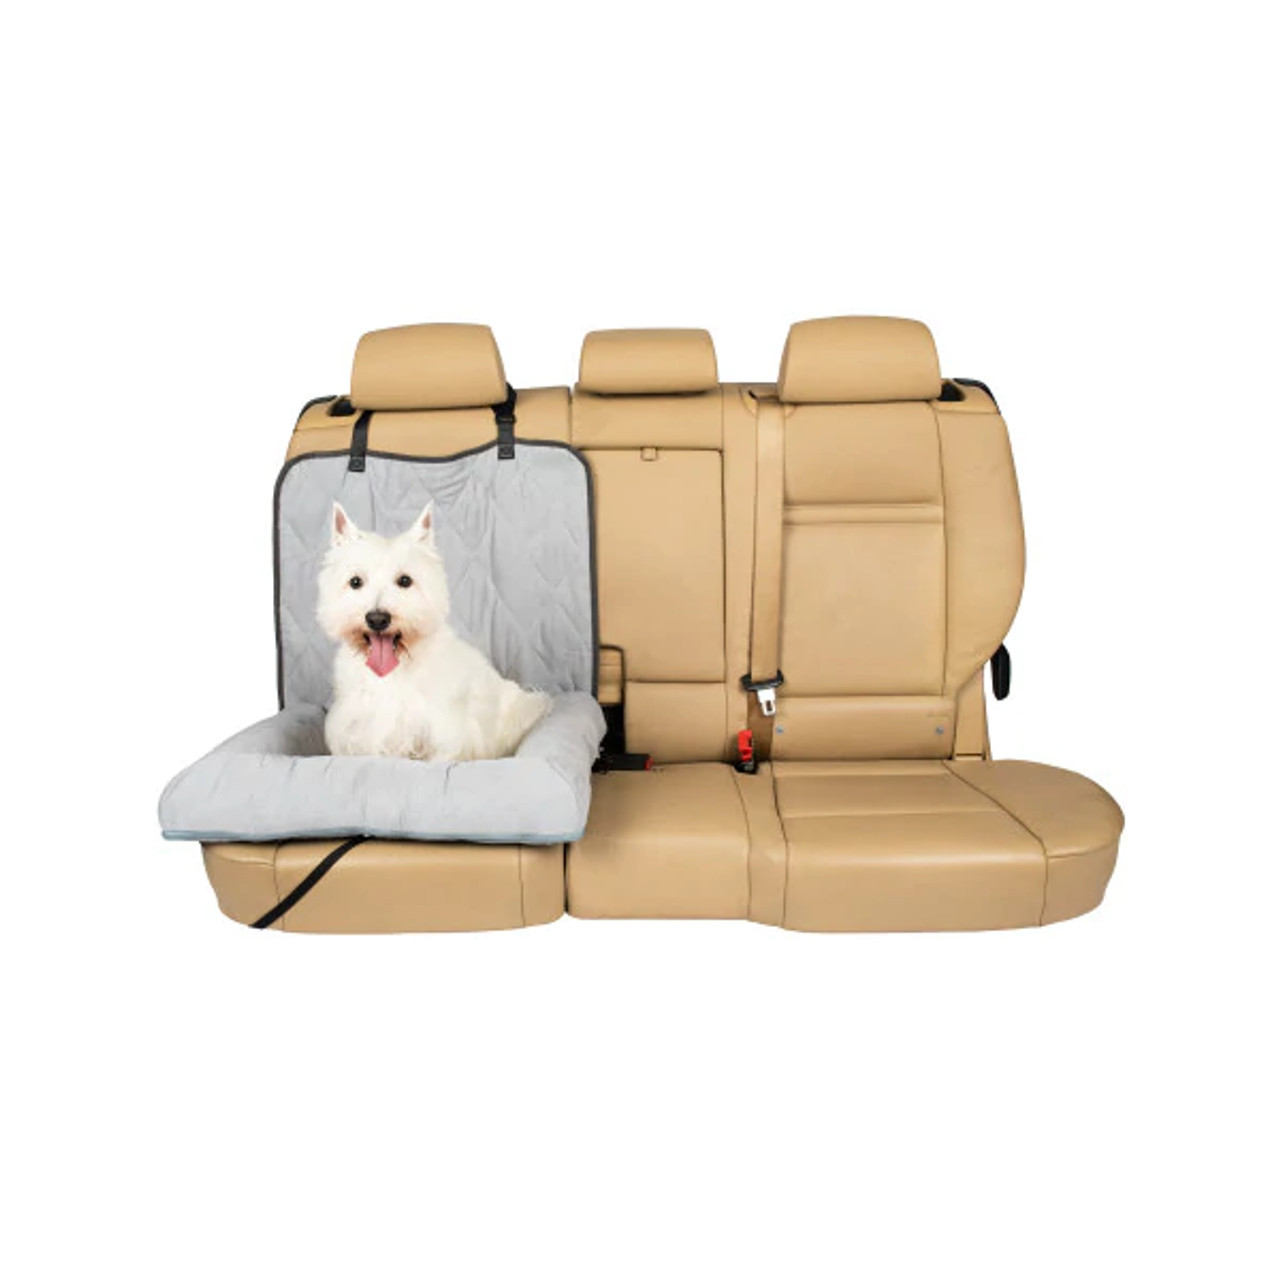 These Car Seat Pet Covers Are Perfect For Travel & 45% Off on Sale